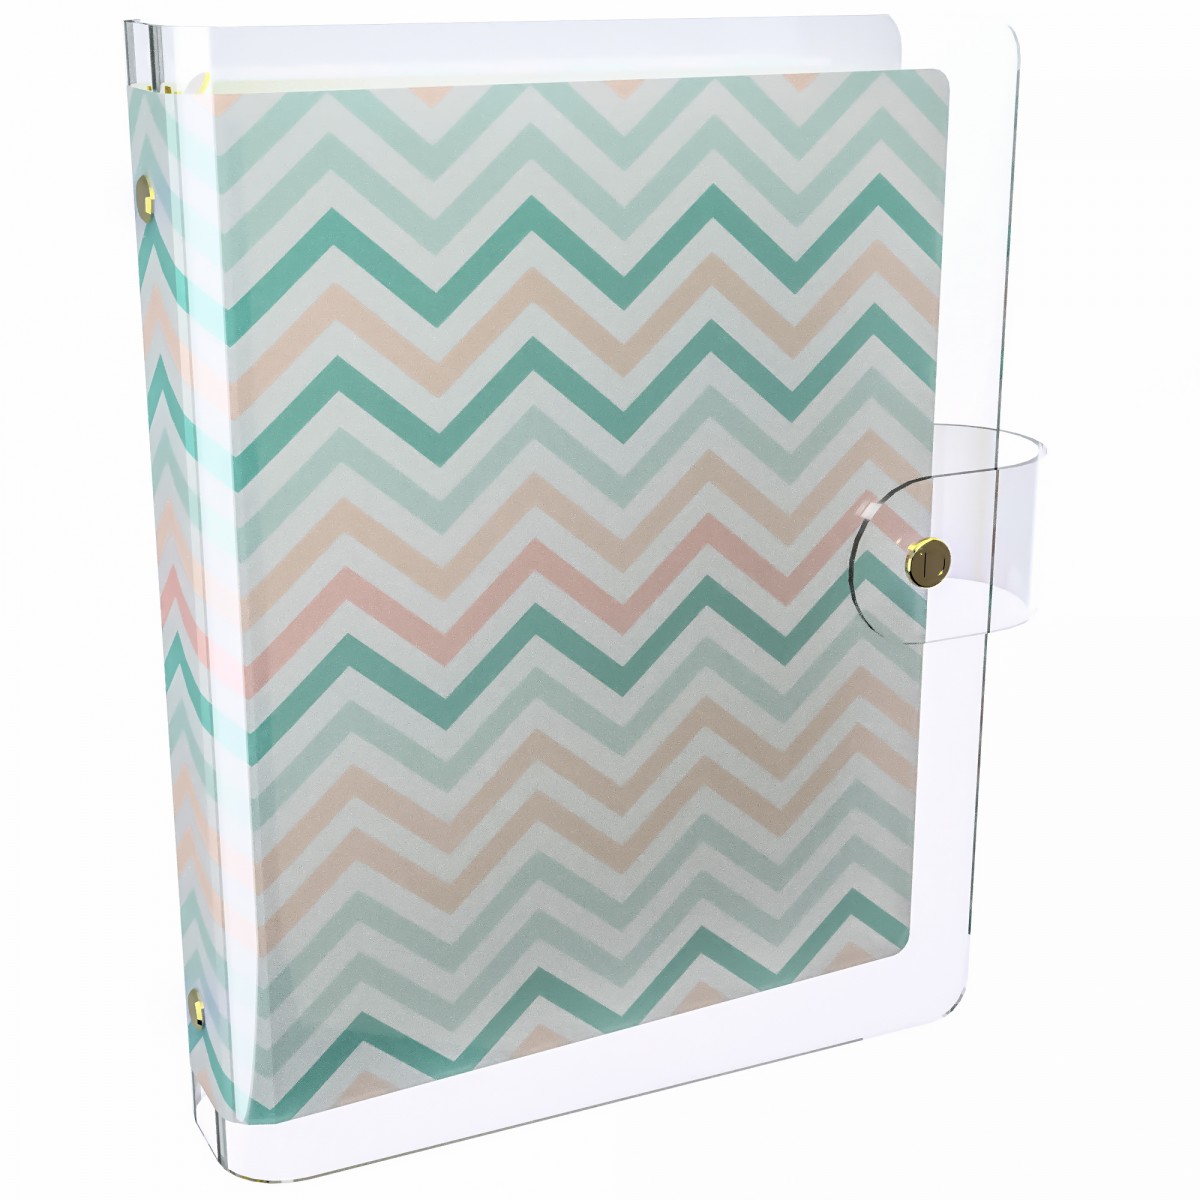 DISCAGENDA CLARITY CLEAR PVC PLANNER COVER - CHEVRON, RINGBOUND, A5 SIZE